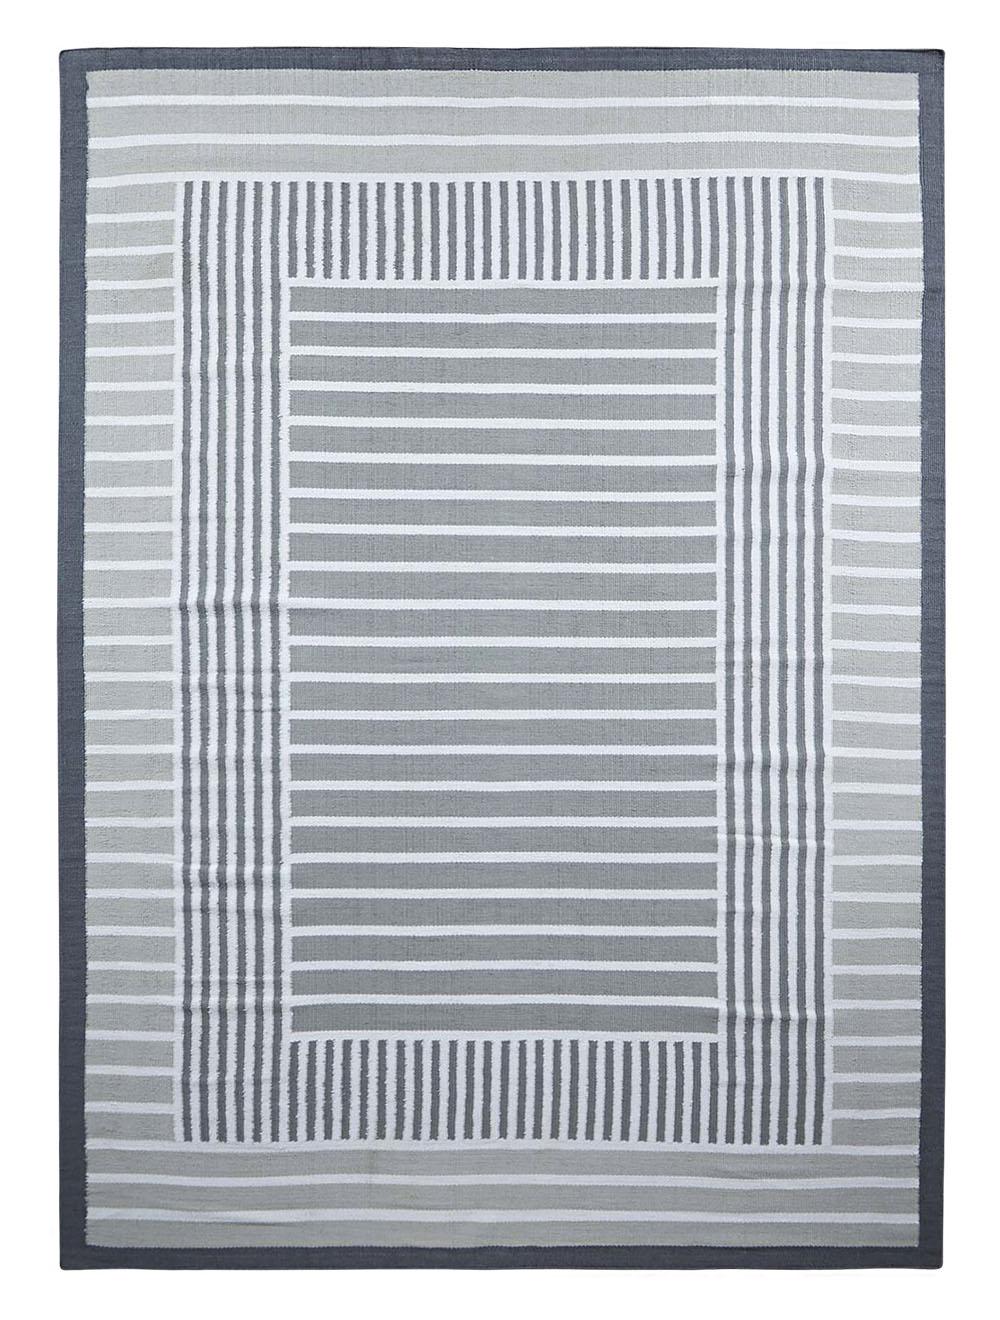 Grey Hemp carpet by Massimo Copenhagen.
Designed by Tanja Kirst.
Handwoven
Materials: 100% Hemp yarn.
Dimensions: W 250 x H 350 cm.
Available colors: Multi, red/yellow, nougat rose, and grey.
Other dimensions are available: 200x300 cm.

The